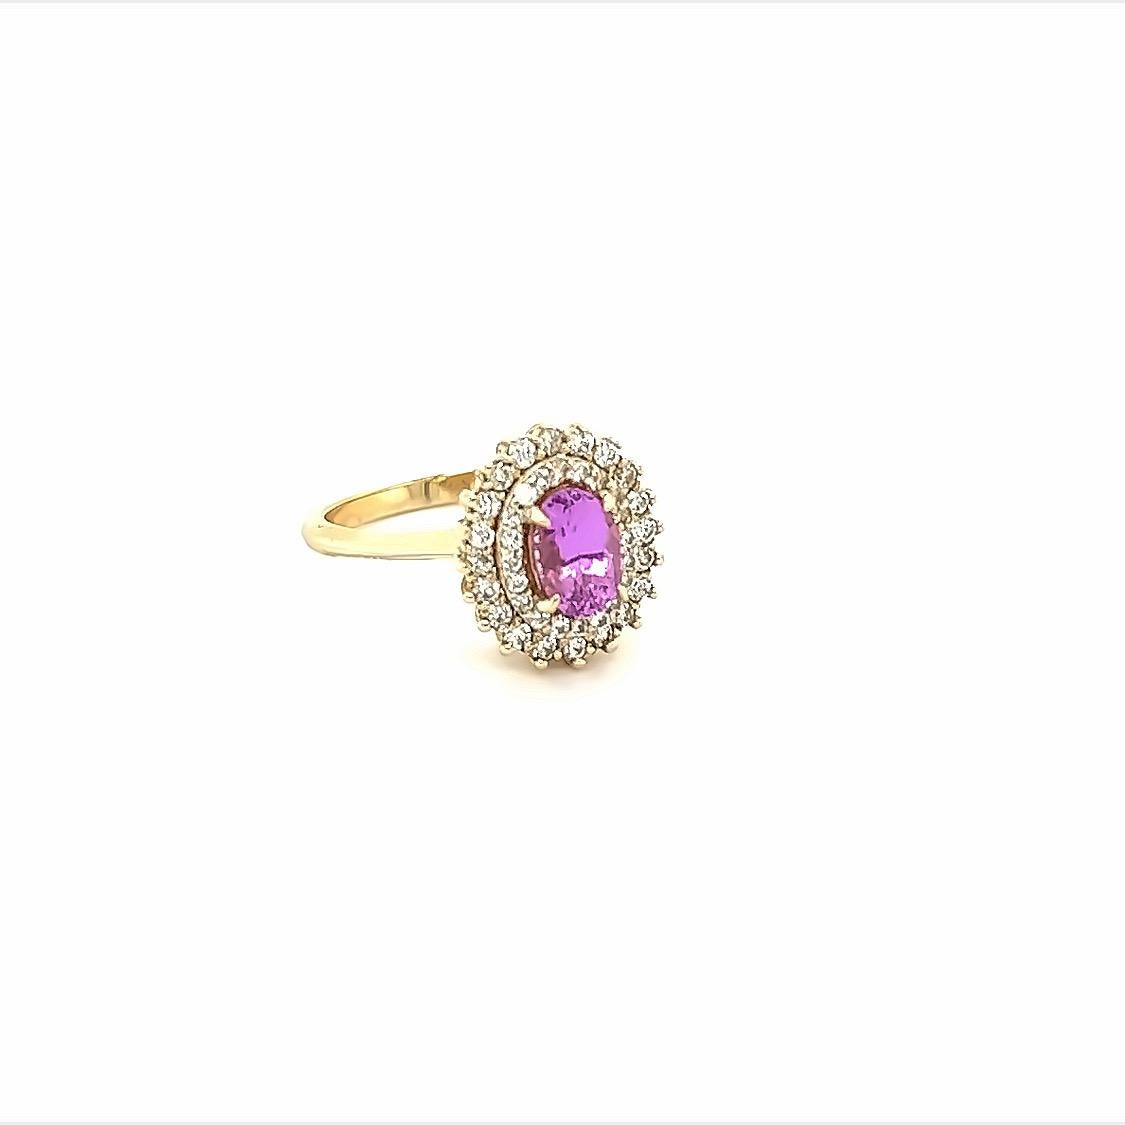 This beautiful ring has a Natural Oval Cut Heated Pink Sapphire that weighs 0.94 Carats. The Pink Sapphire is  7 mm x 5 mm. 

The ring is embellished with 40 Round Cut Diamonds that weigh 0.40 Carats with a clarity and color of VS/F. 
The total